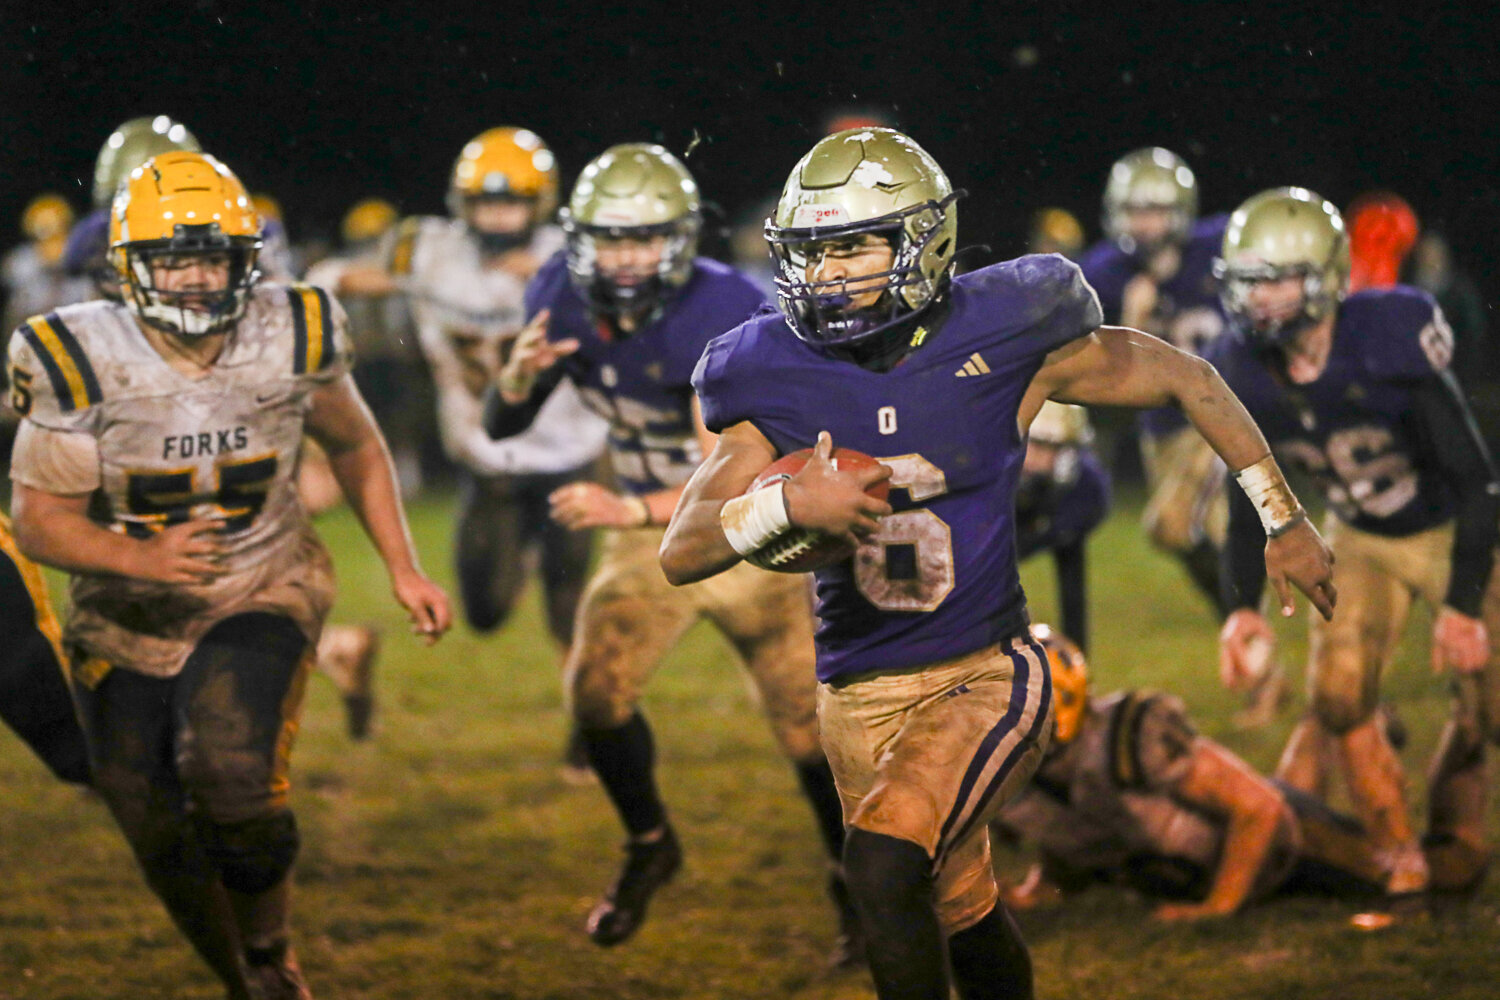 Rodrigo Rodriguez hits the left sideline during the second half of Onalaska's 20-7 win over Forks in a district crossover on Nov, 3,